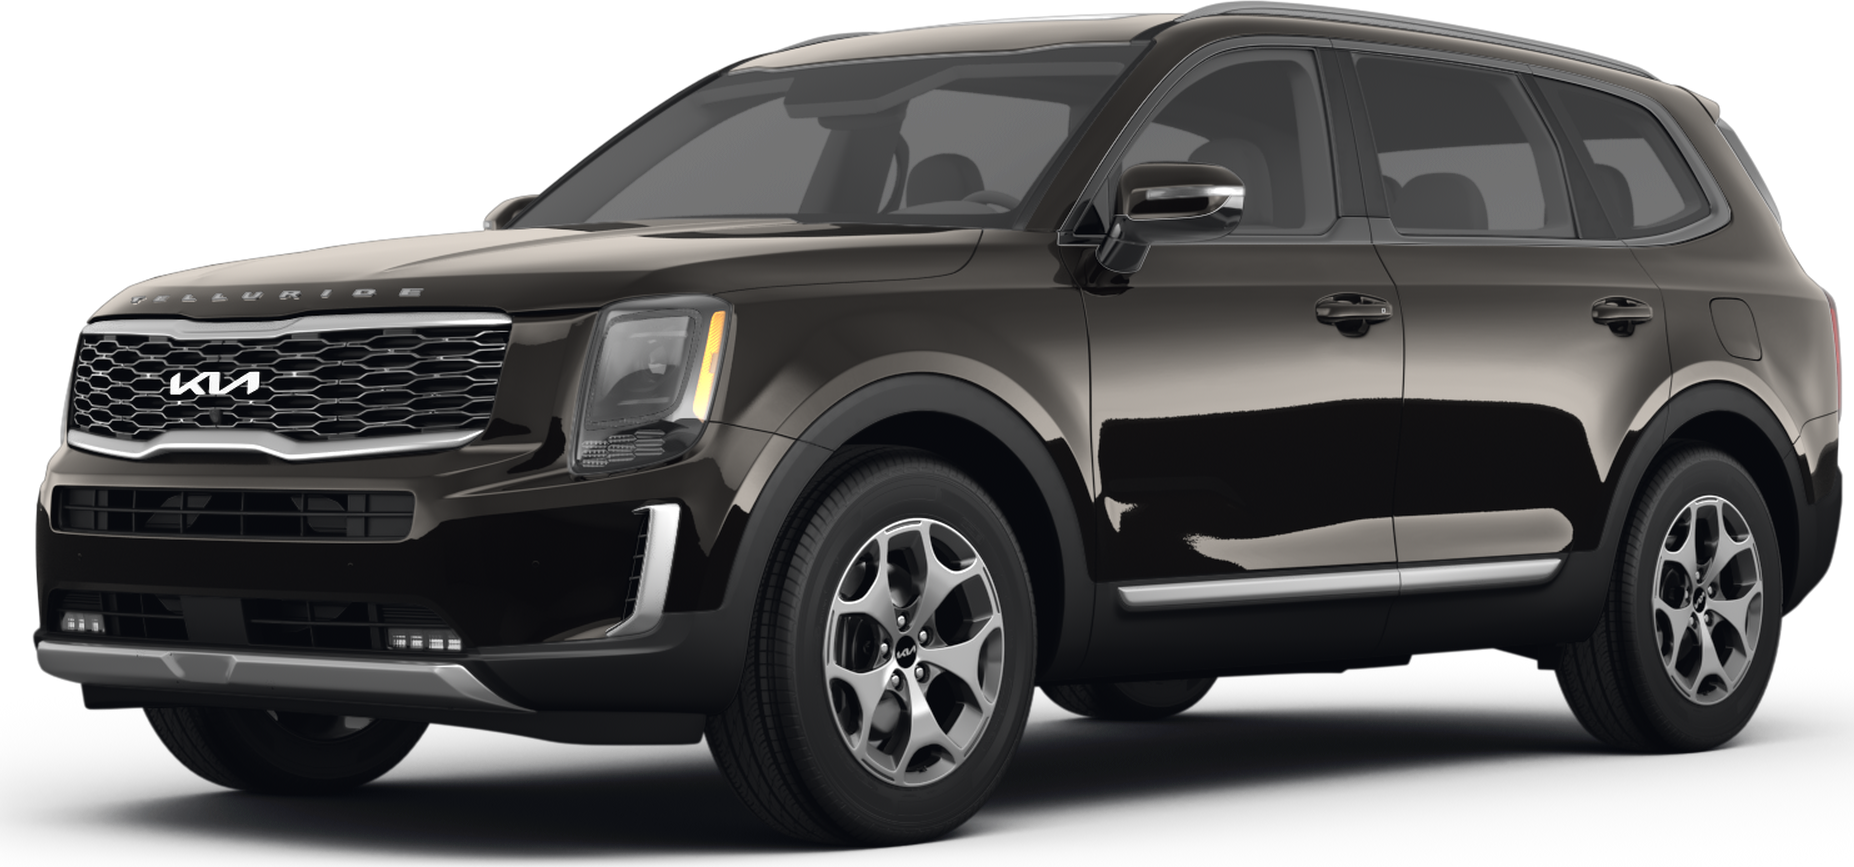 2022 Kia Telluride Price, Reviews, Pictures & More Kelley Blue Book